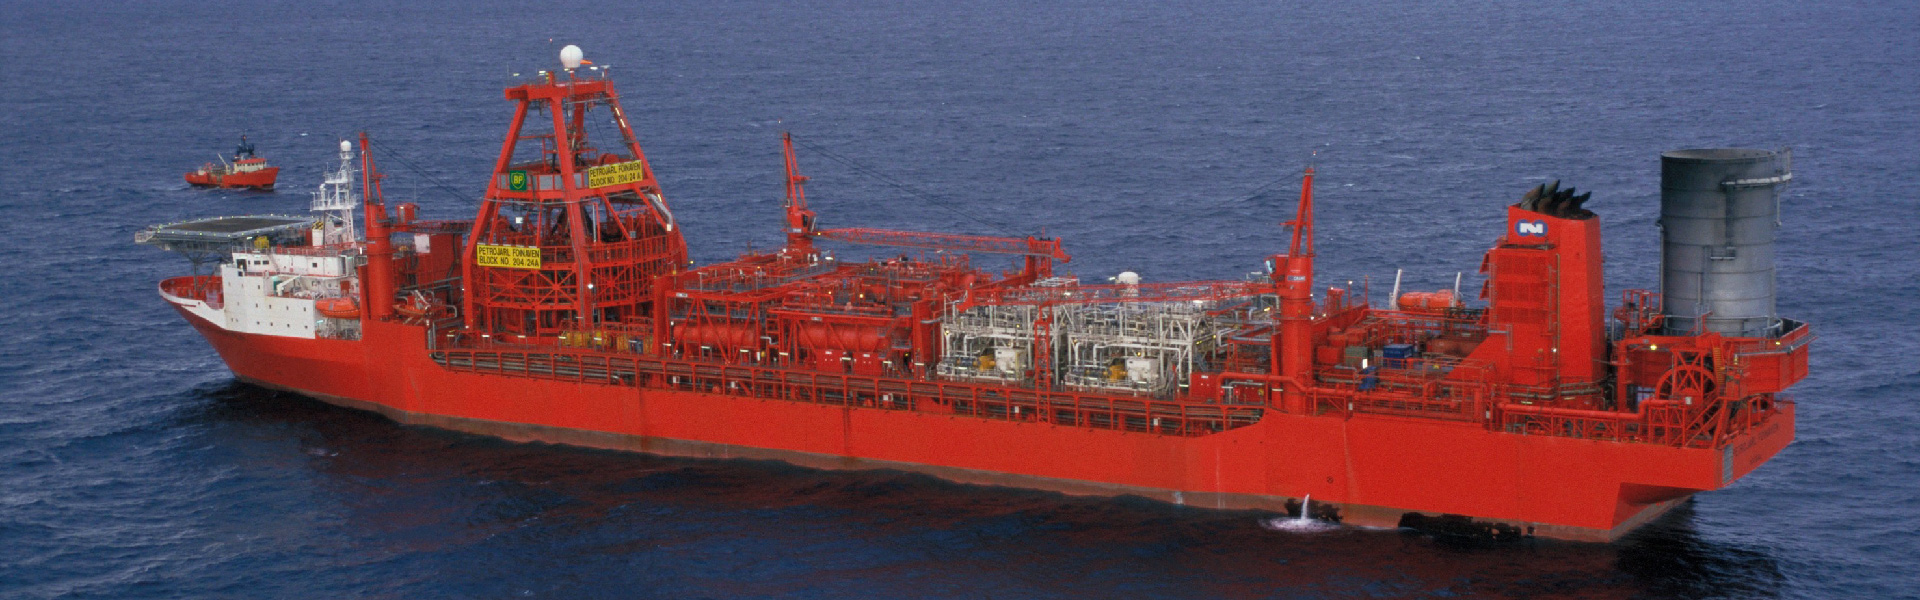 Teekay Announces New Bareboat Contract For The Foinaven FPSO